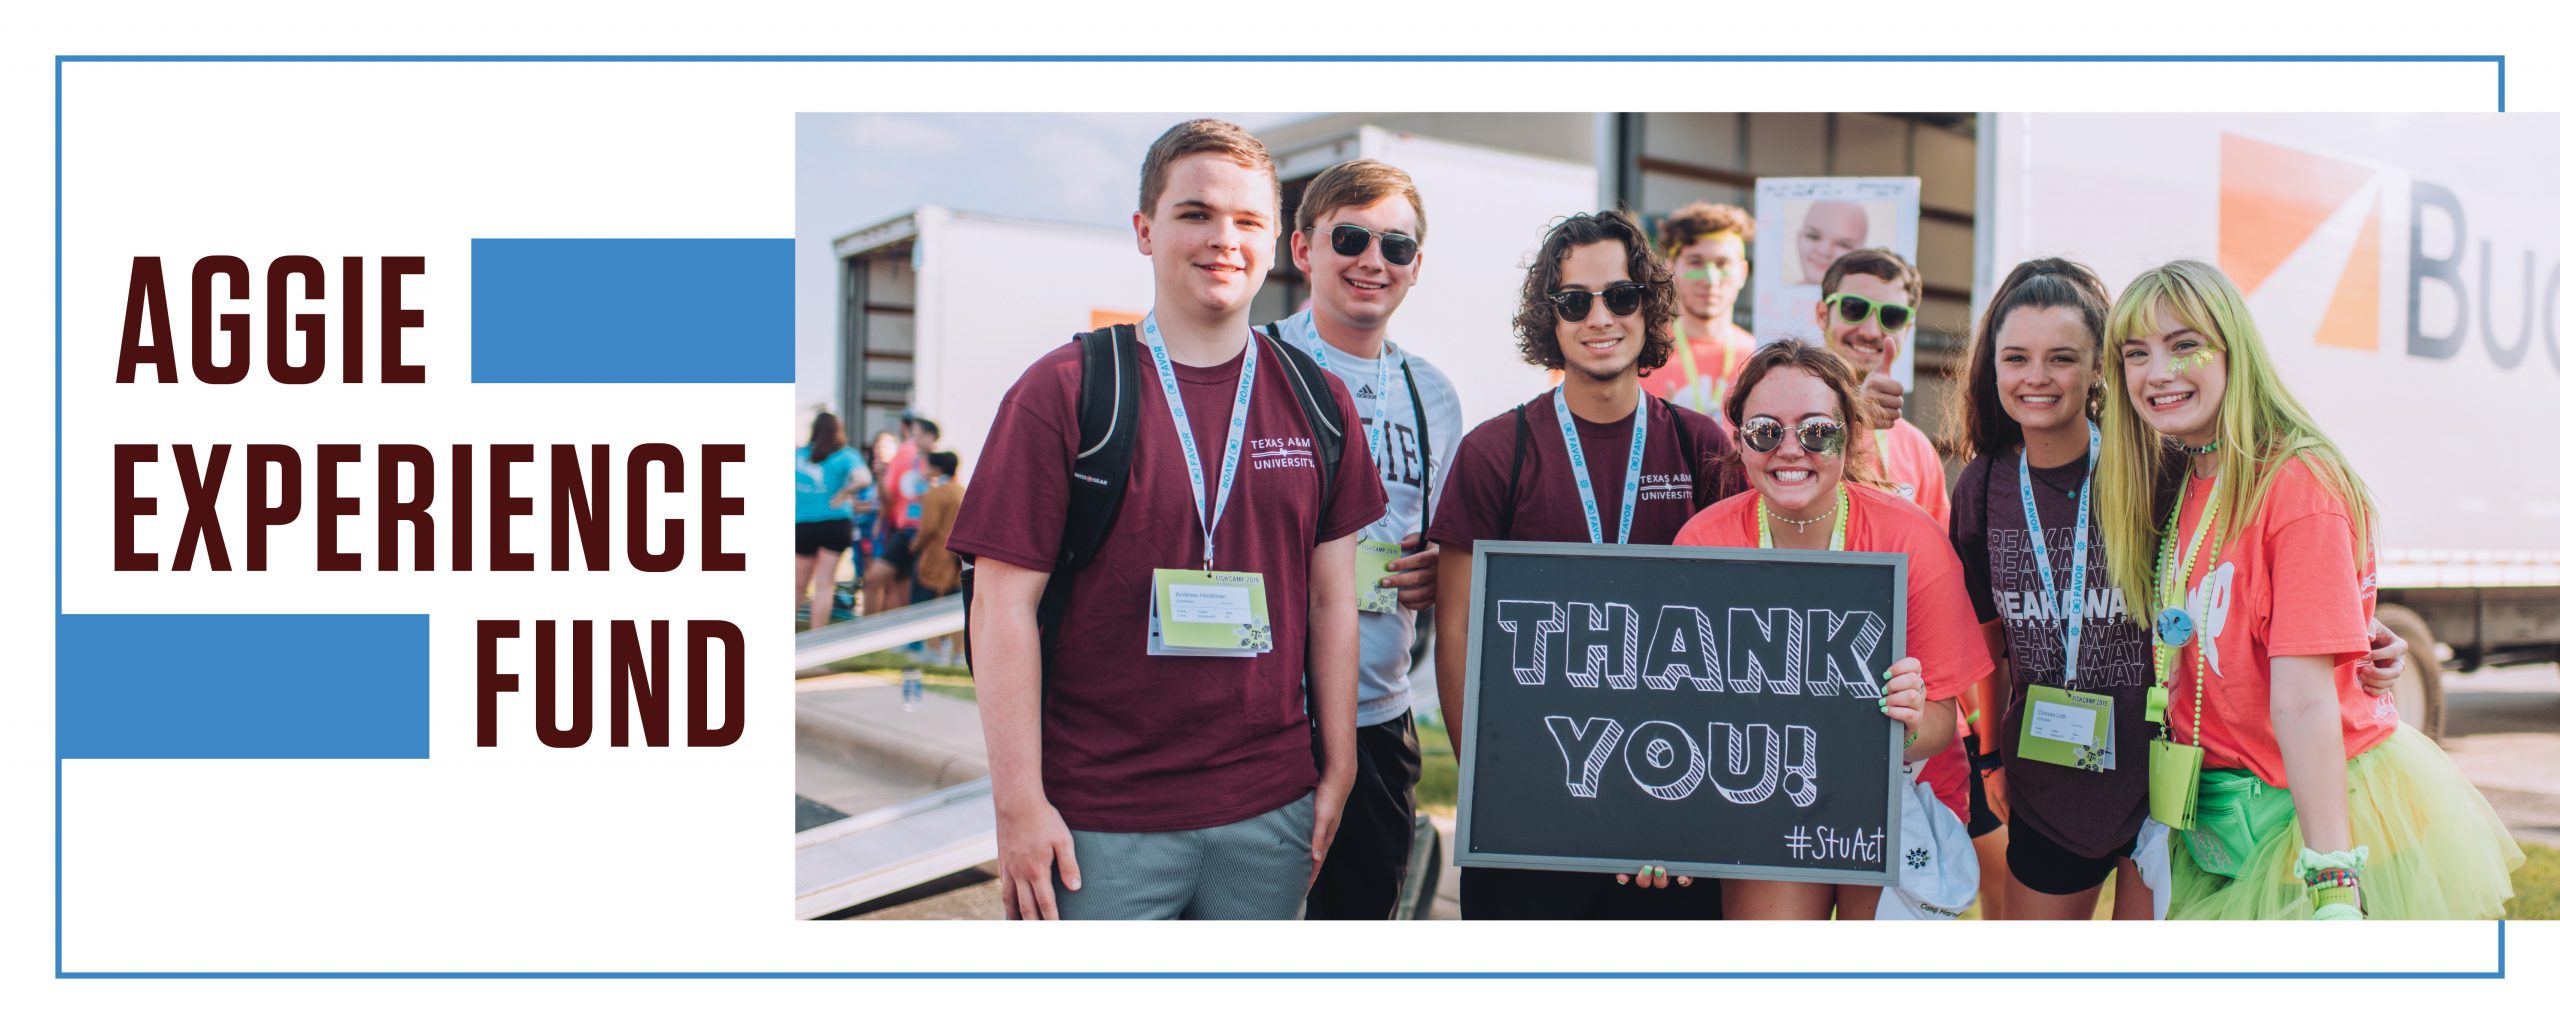 Aggie Experience Fund graphic with image of students in a group photo at Fish Camp holding a Thank You sign